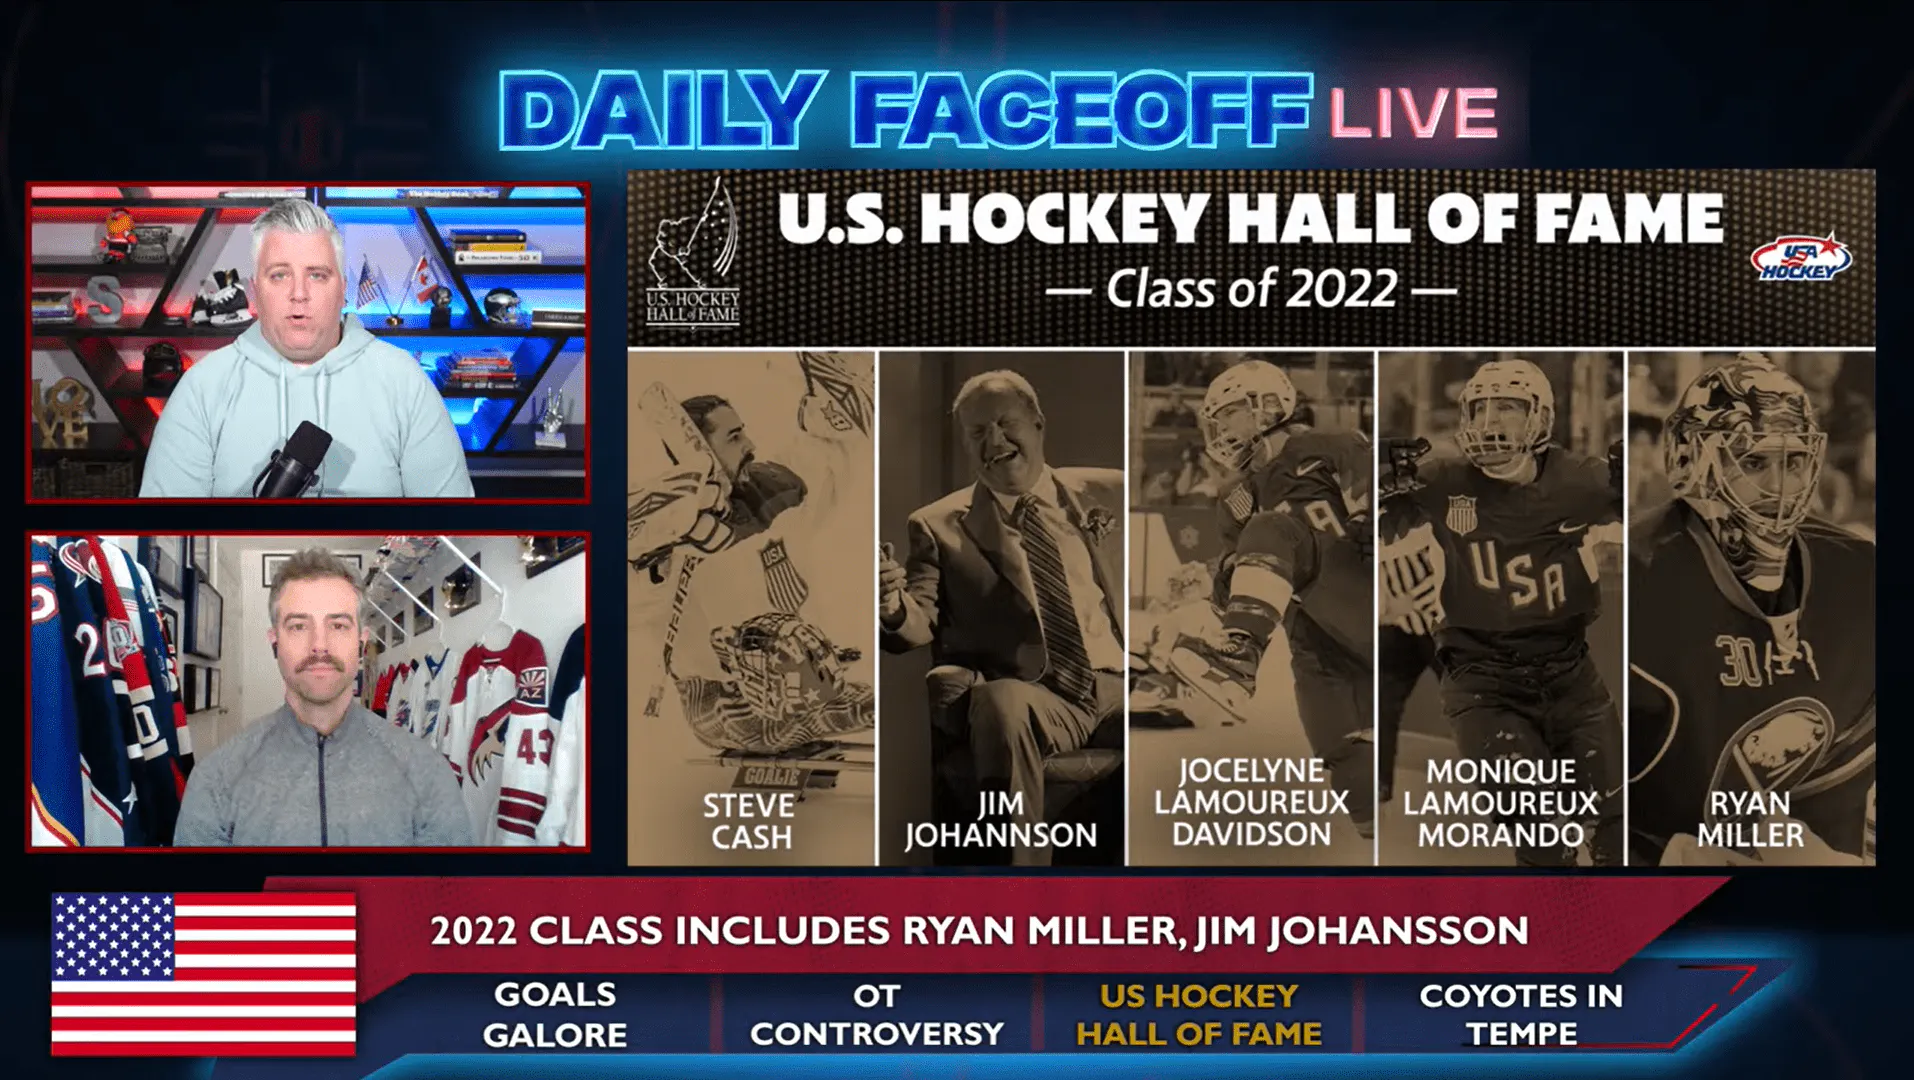 Daily Faceoff Live: Paying tribute to Jim Johannson and the 2022 U.S. Hockey Hall of Fame class